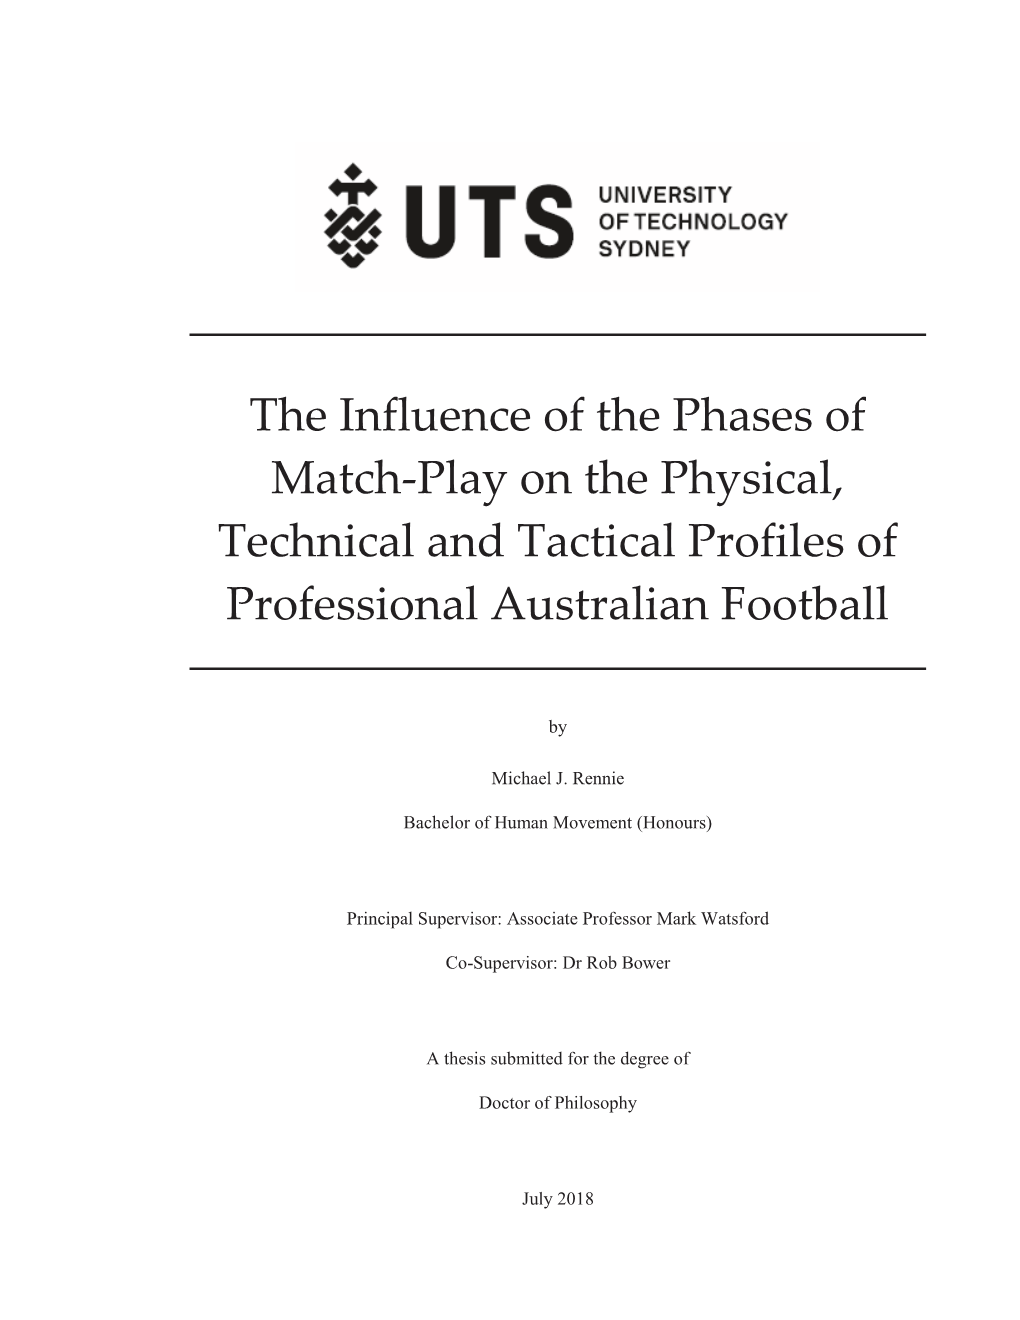 The Influence of the Phases of Match-Play on the Physical, Technical and Tactical Profiles of Professional Australian Football